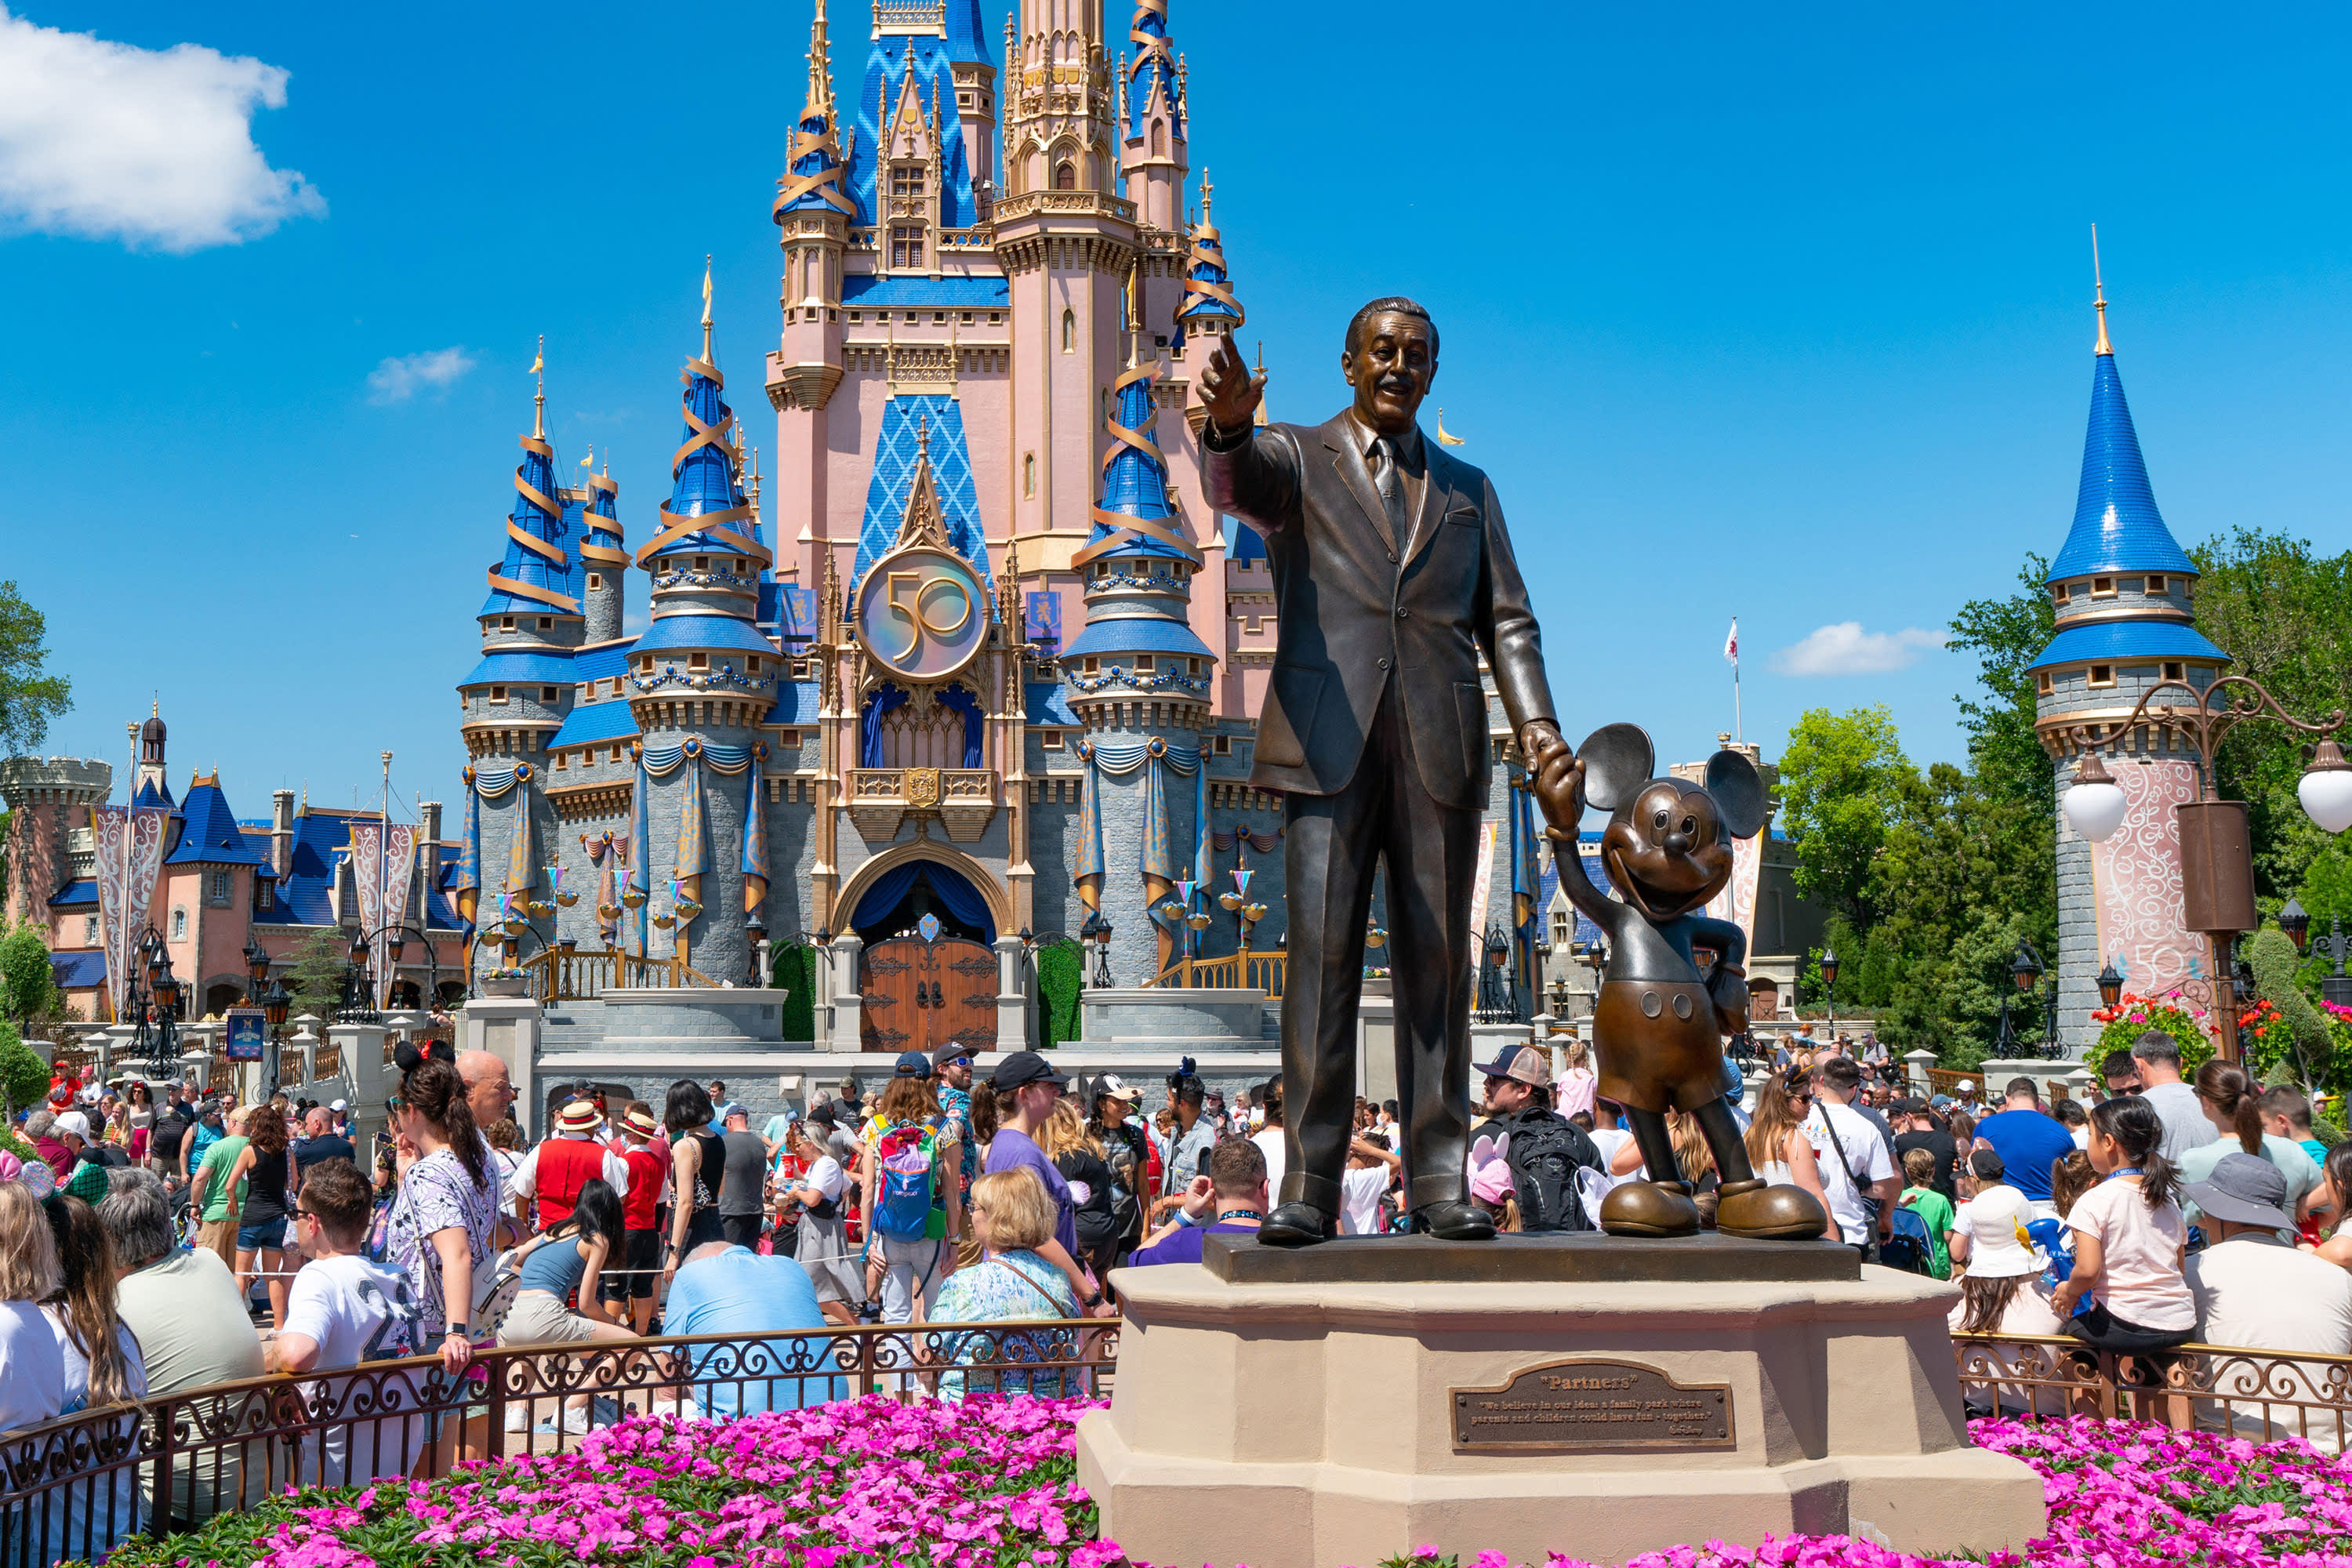 Disney is investing more in parks and cruises